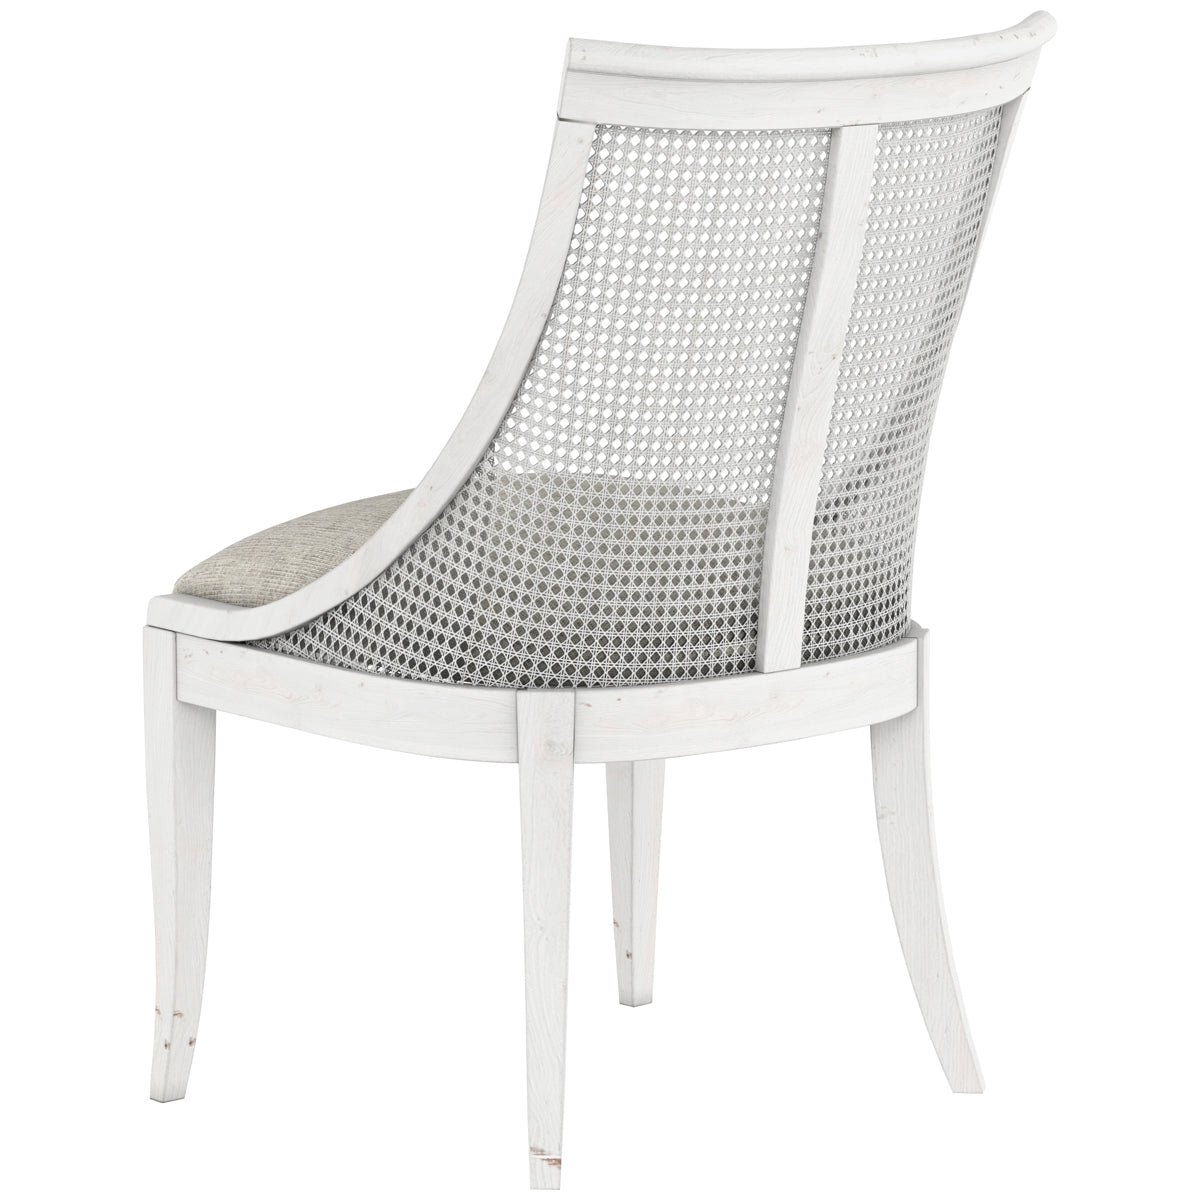 A.R.T. Furniture Somerton Woven Sling Dining Chair, Set of 2